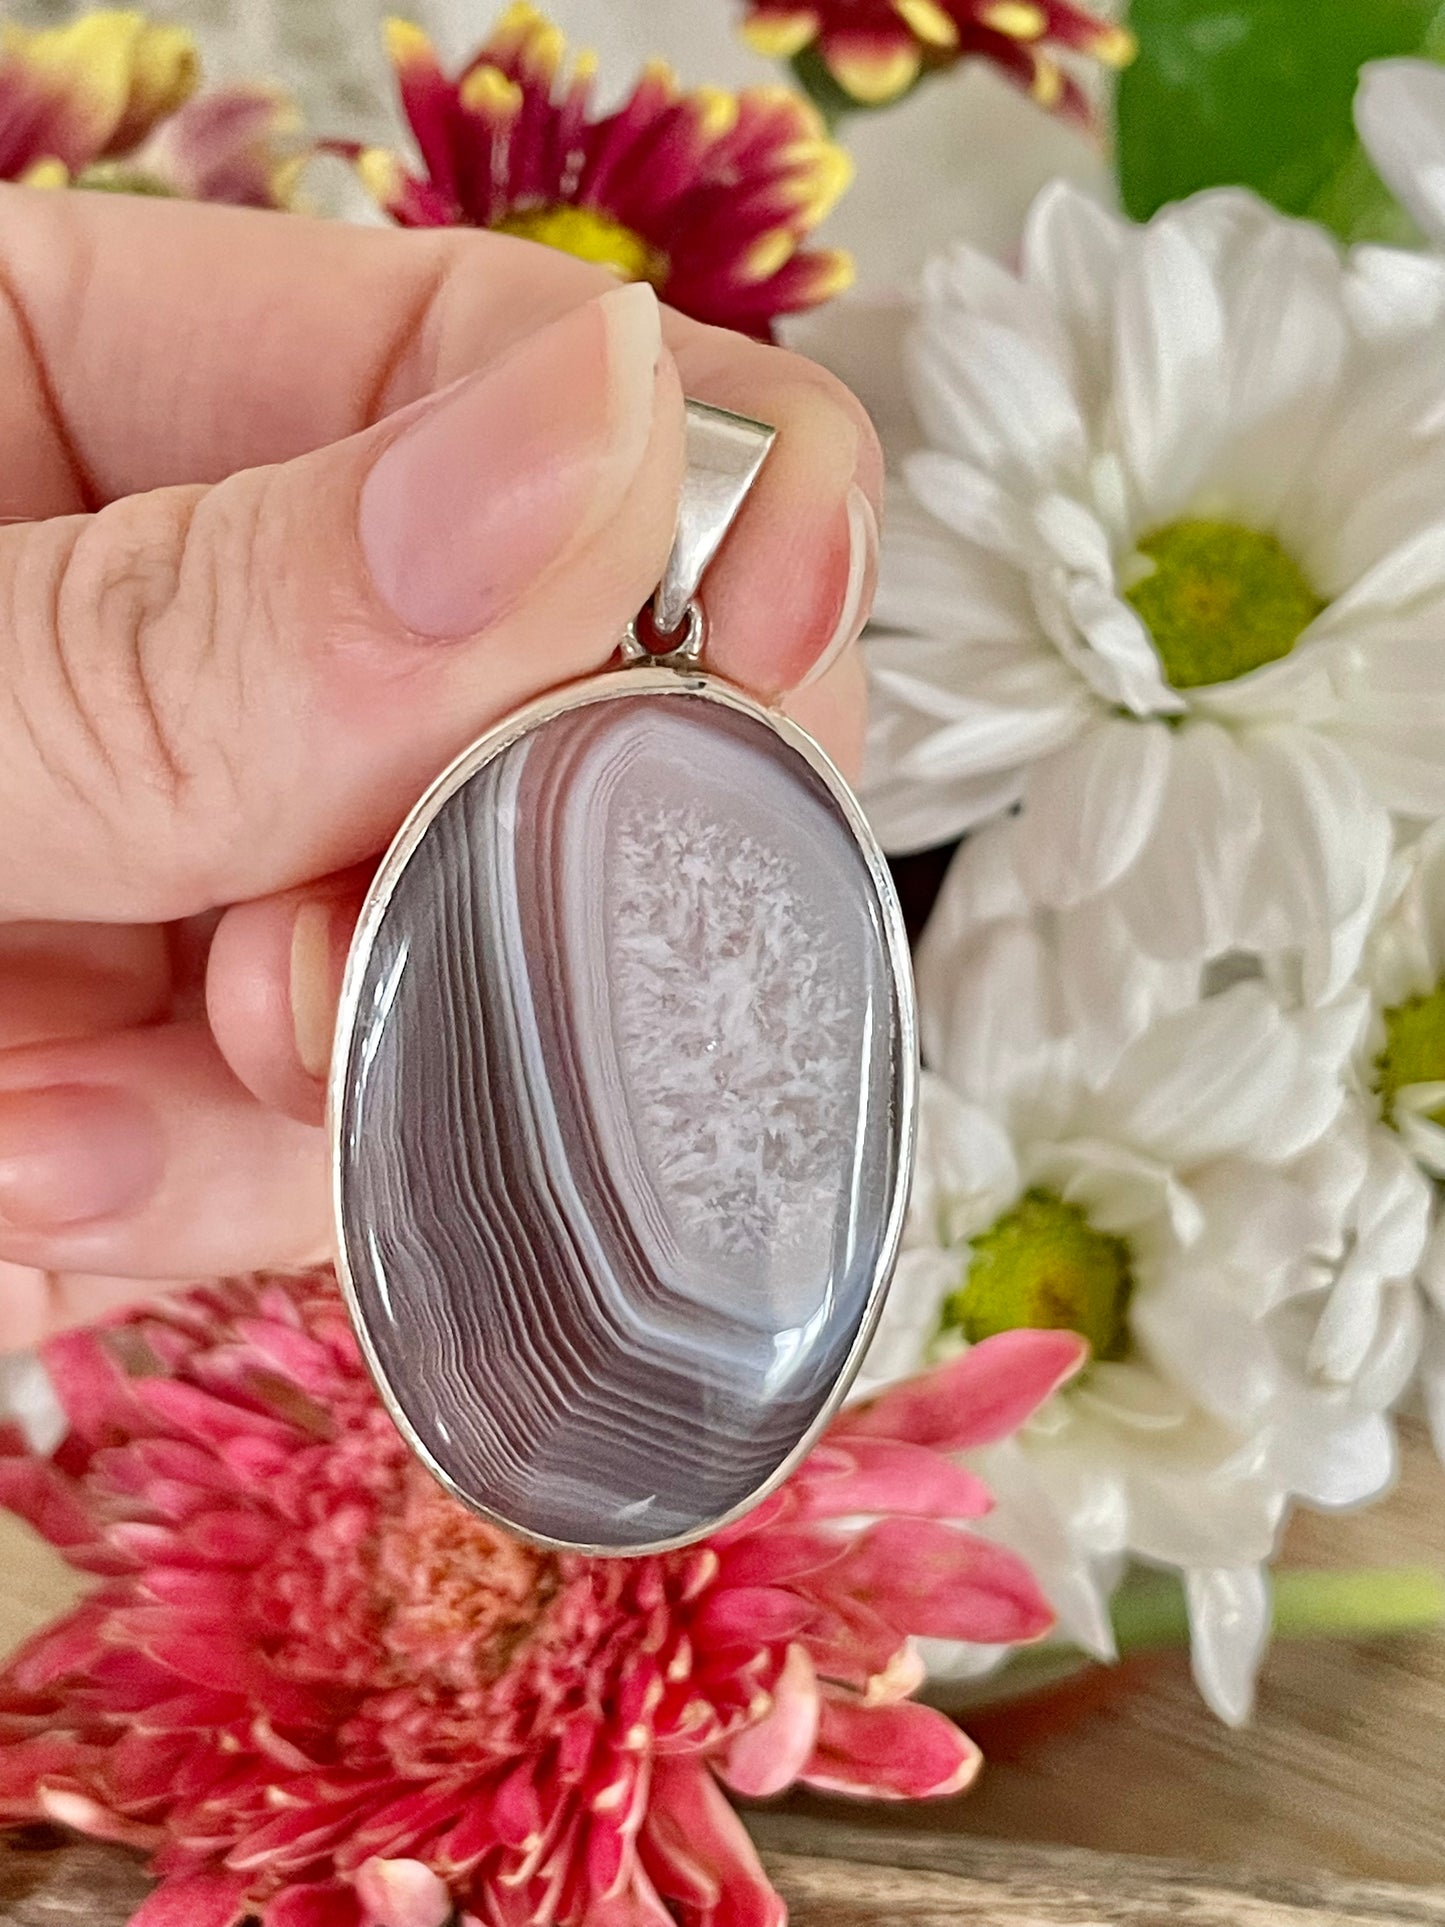 Banded Agate Silver Pendant